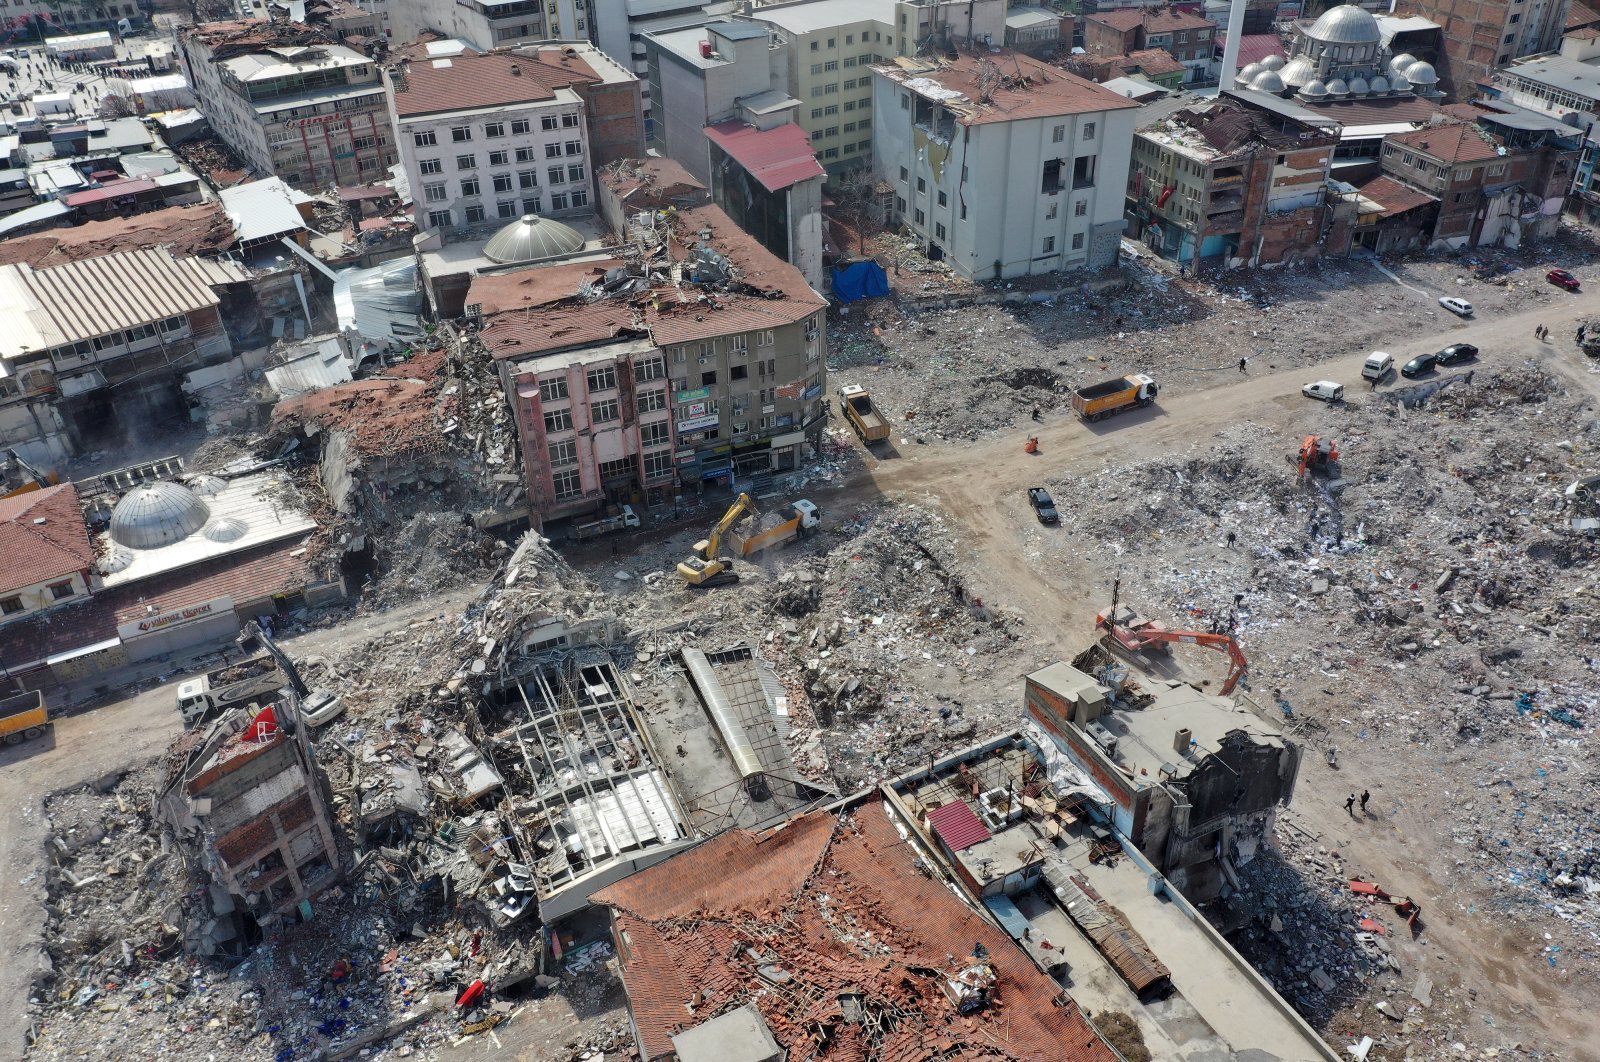 An aerial view shows buildings destroyed after the Feb. 6 earthquakes, Malatya, Türkiye, April 4, 2023. (AA Photo)